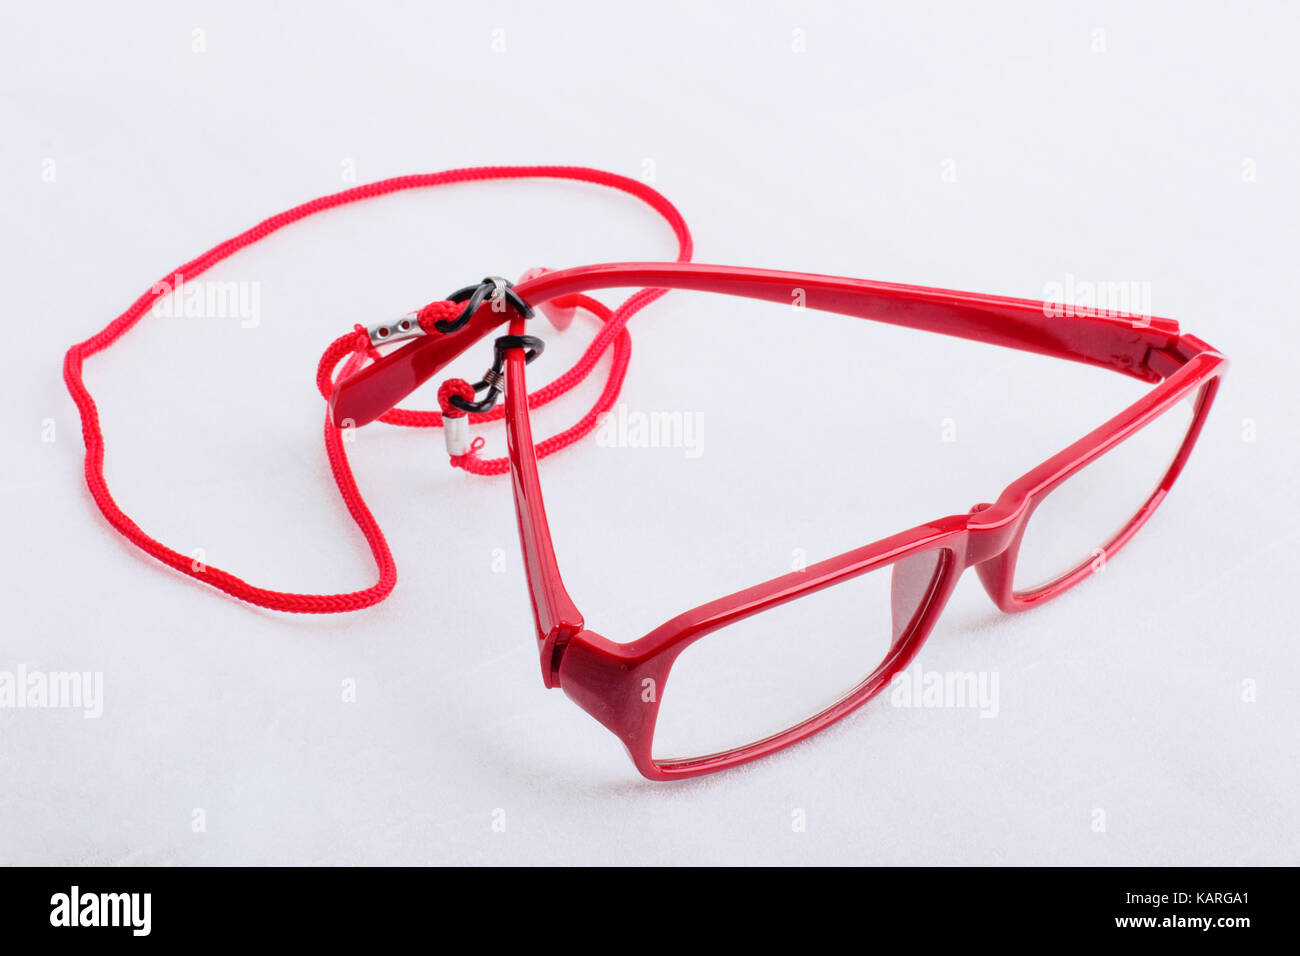 Red reading glasses with red neck strap attached to them, on a white surface. Stock Photo